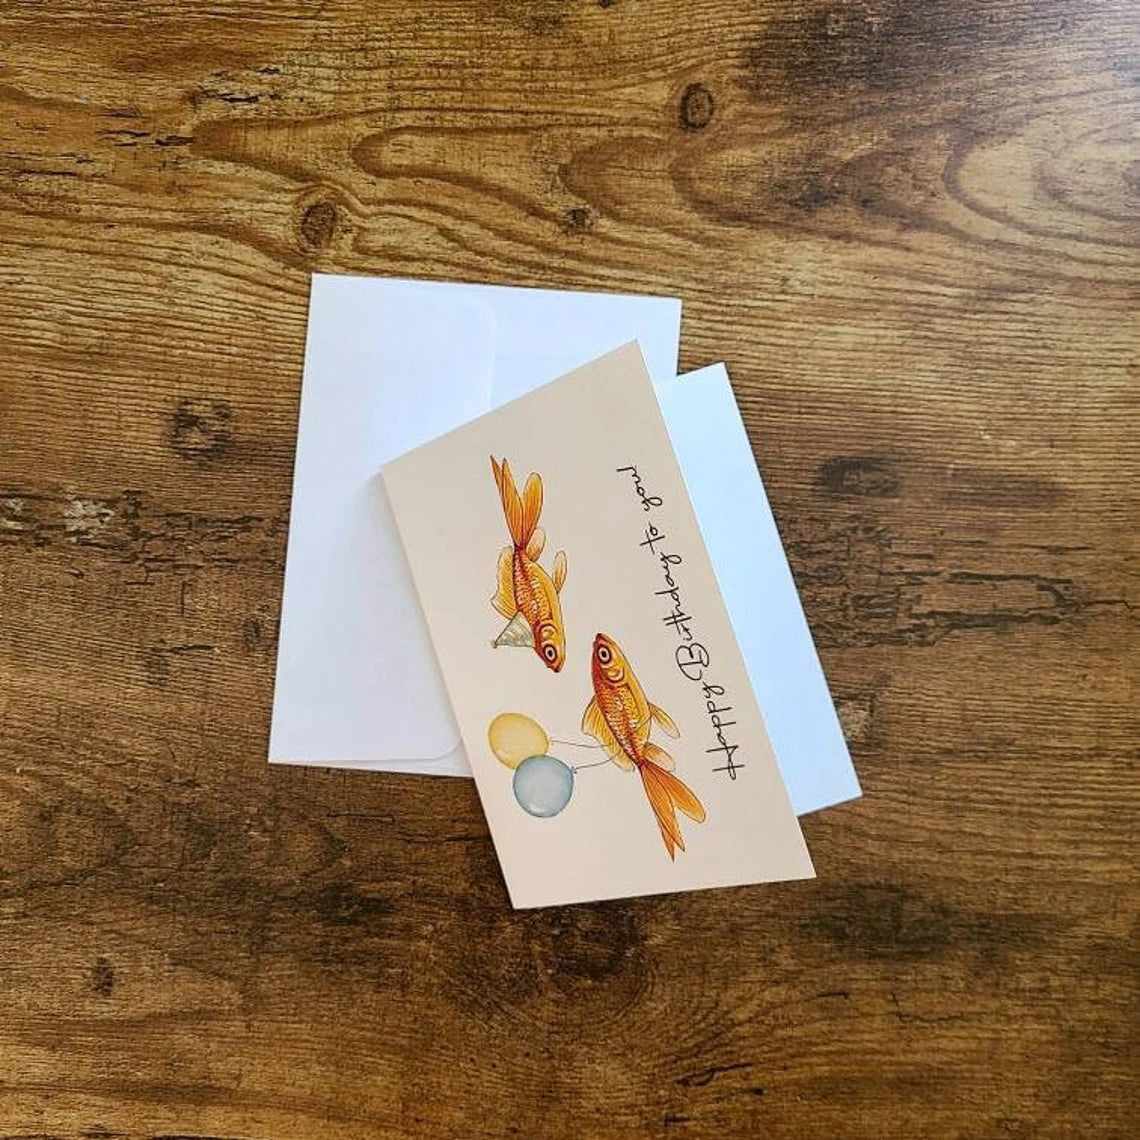 Happy Birthday to you, Birthday card, Cute birthday card for friend, Fish lover birthday card, Card for him, Goldfish Birthday Party card